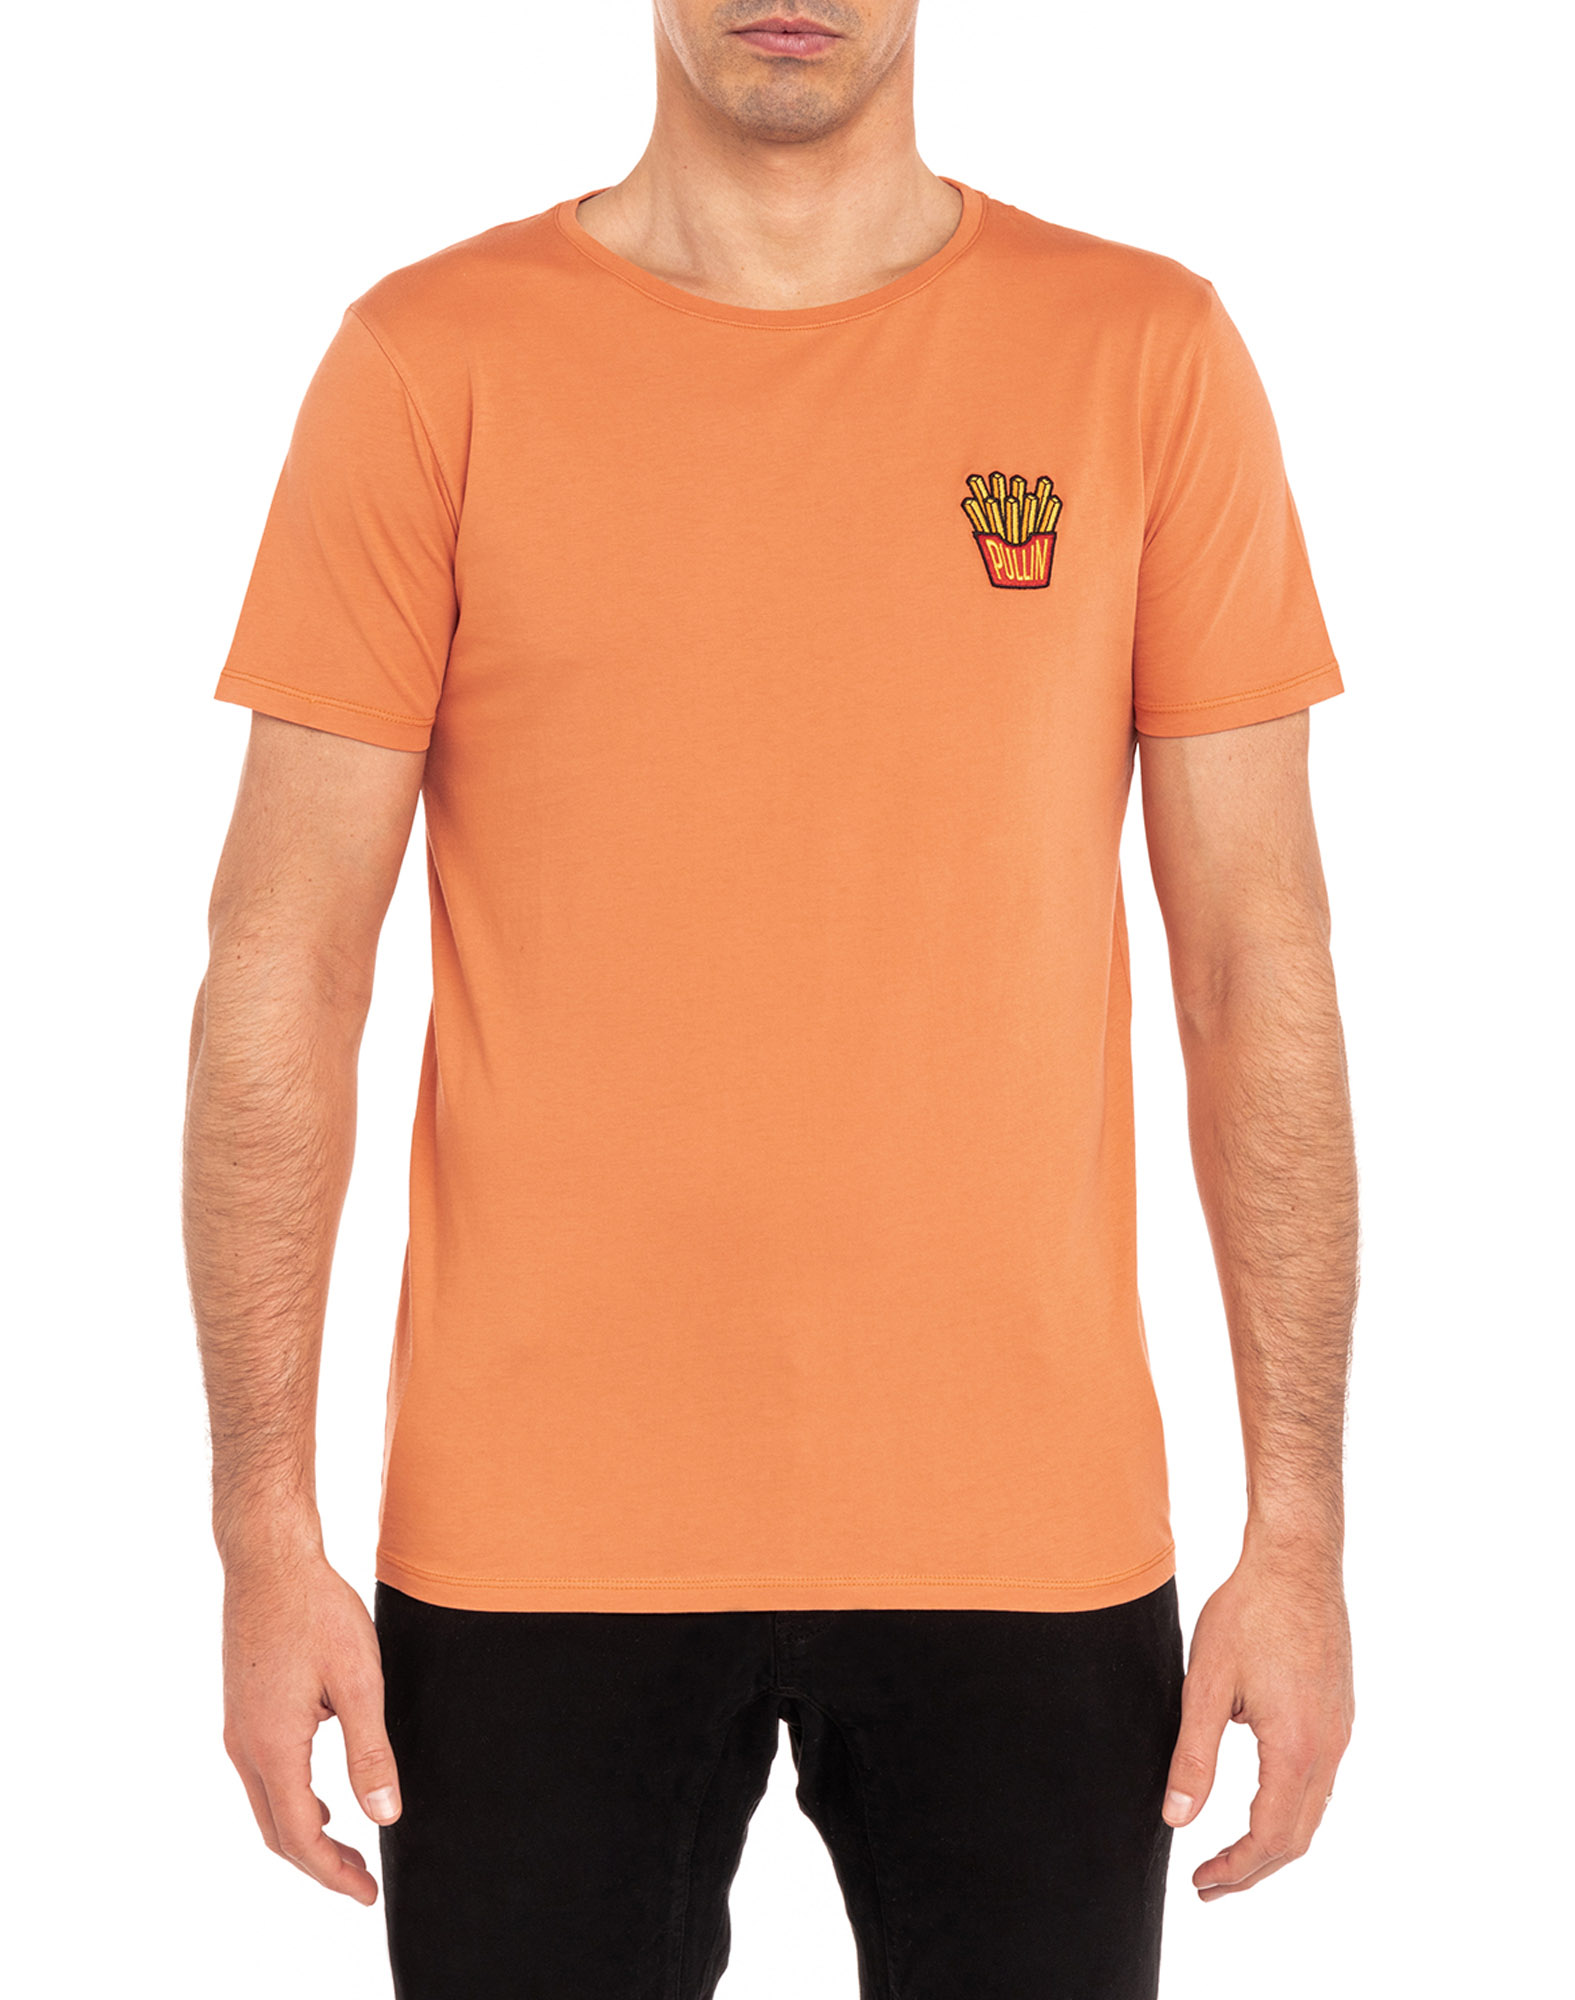 T-shirt homme PATCHFRIES